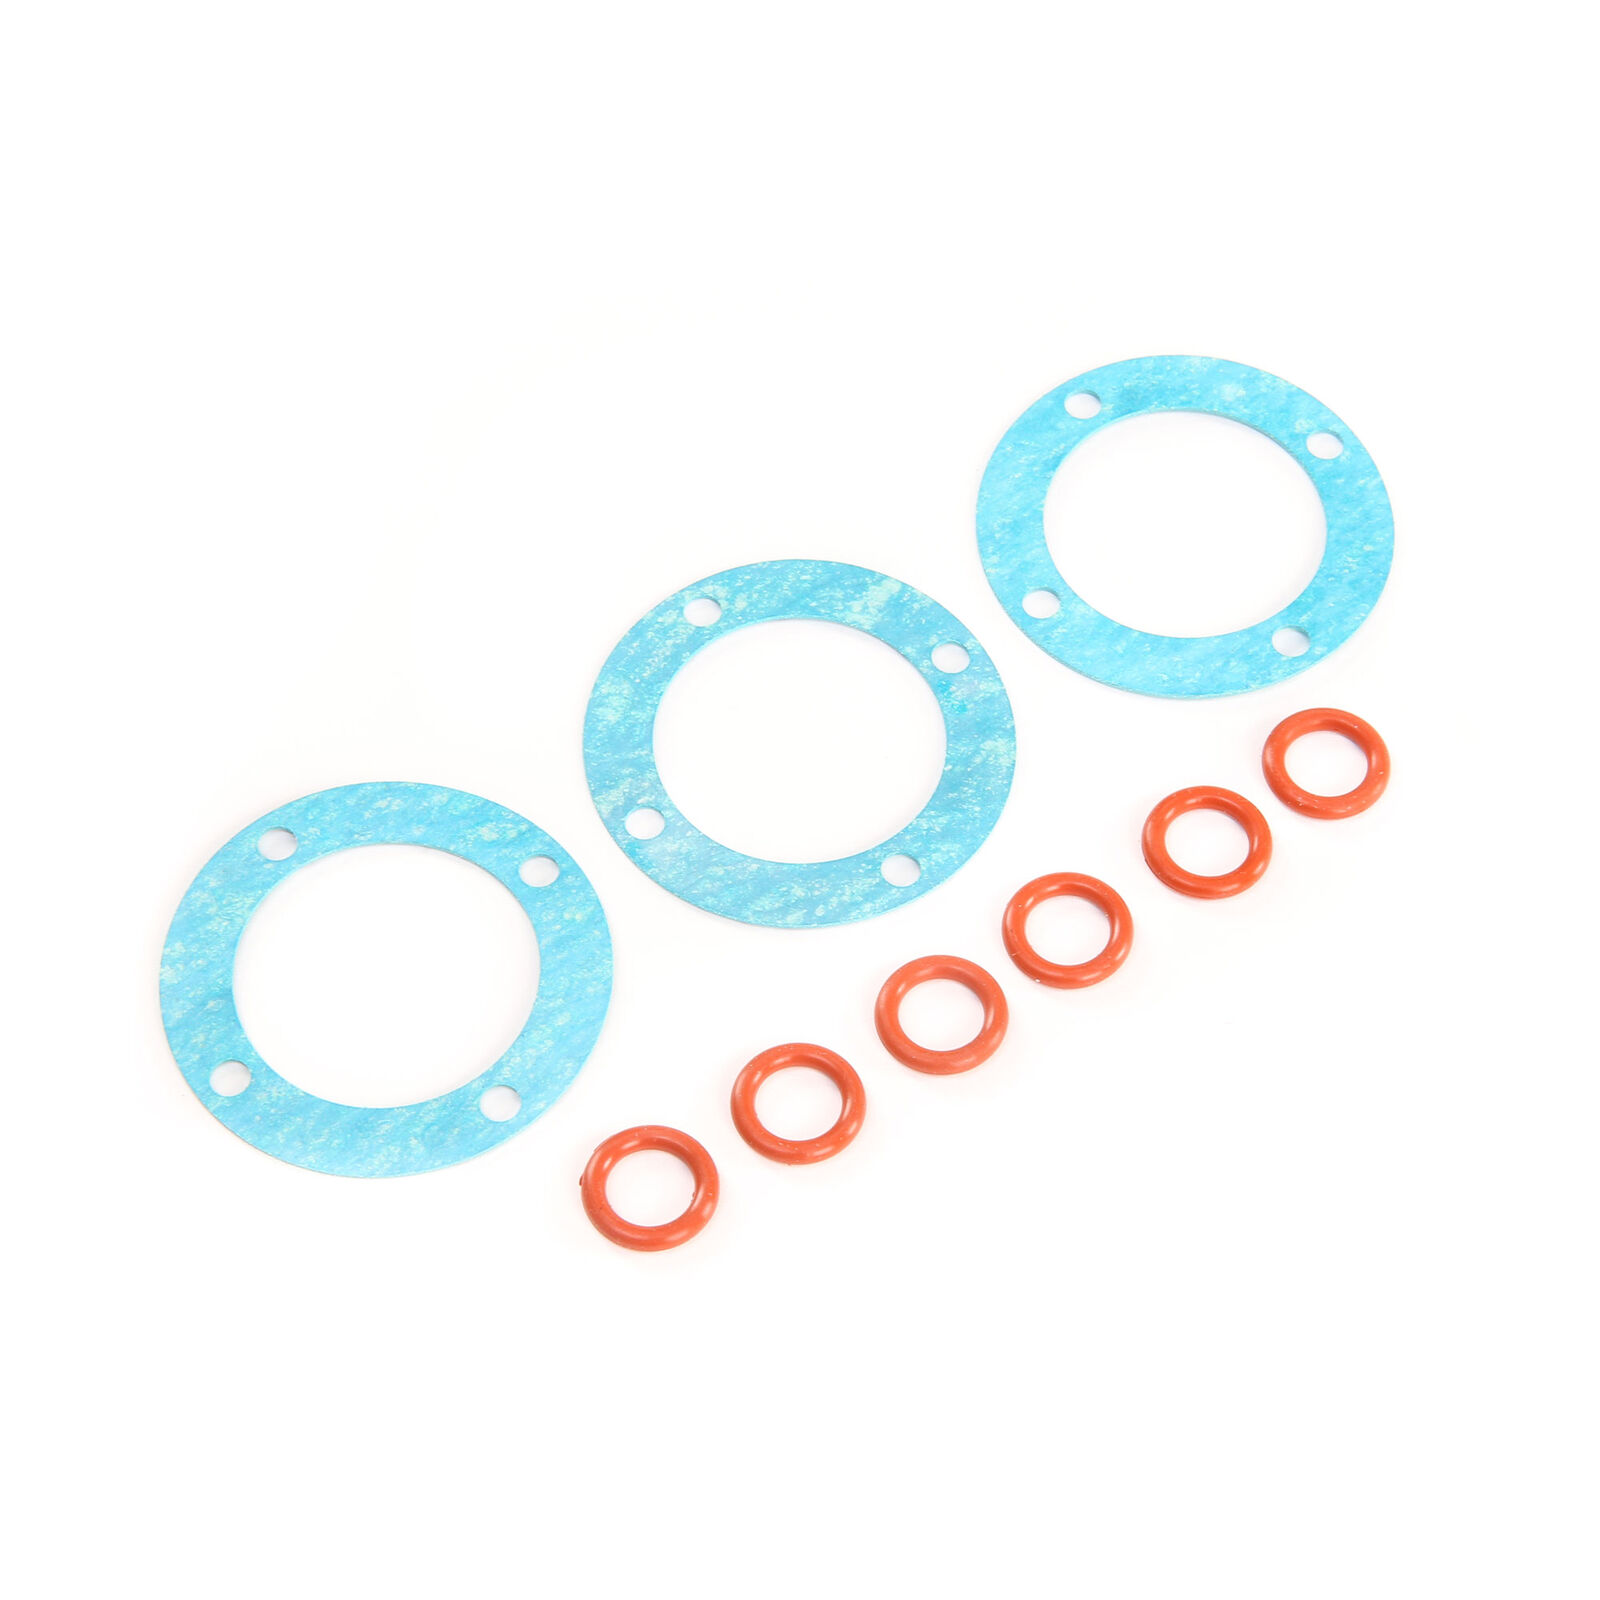 Outdrive O-rings and Differential Gaskets (3): 5ive-T 2.0